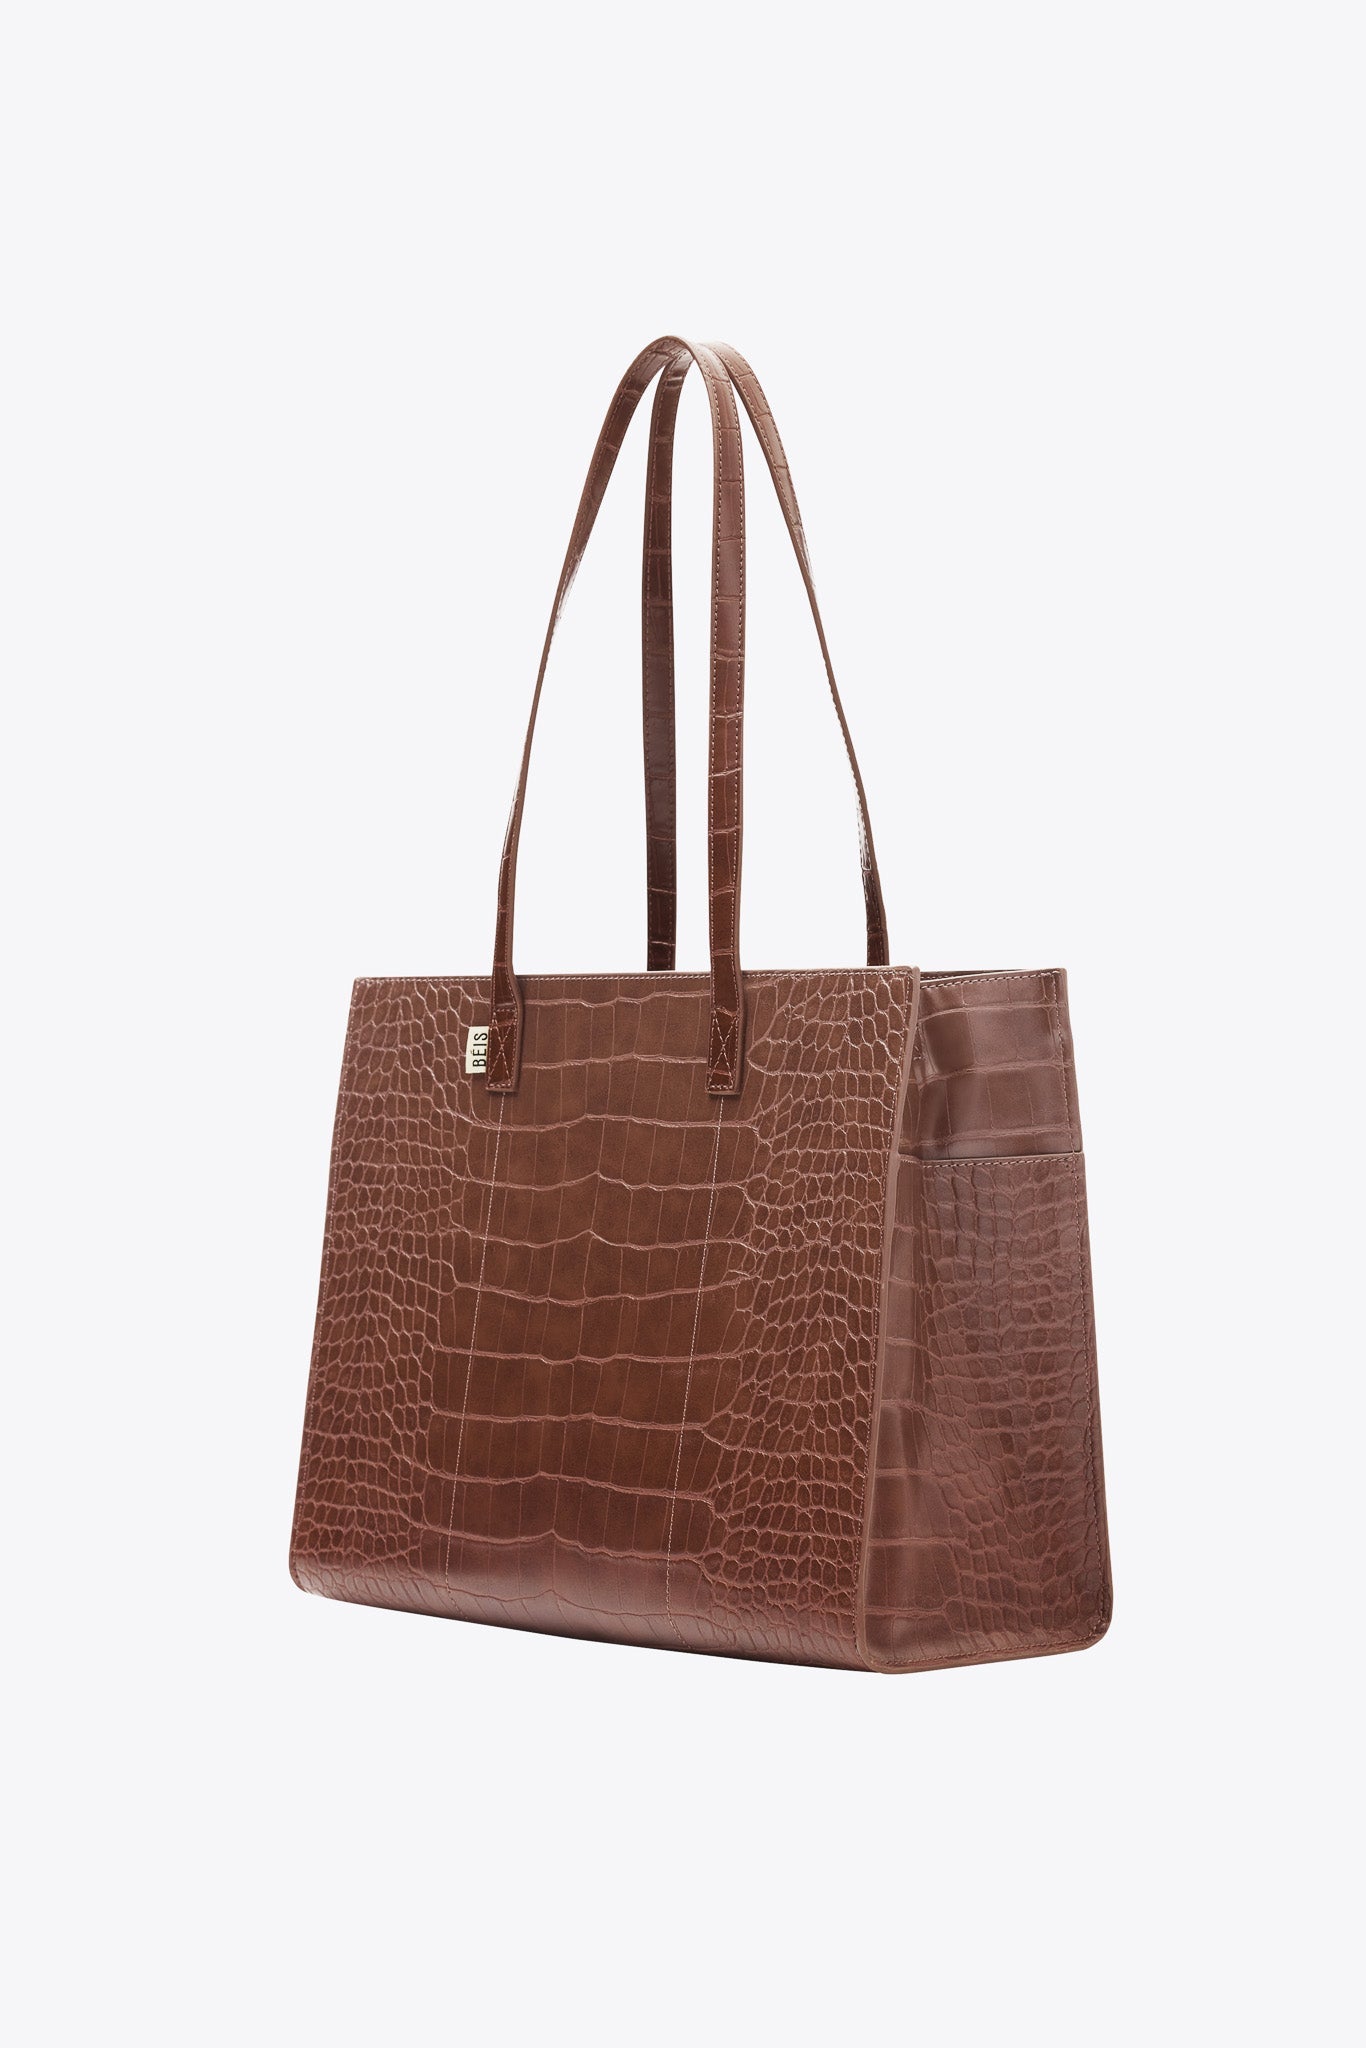 The Work Tote in Maple